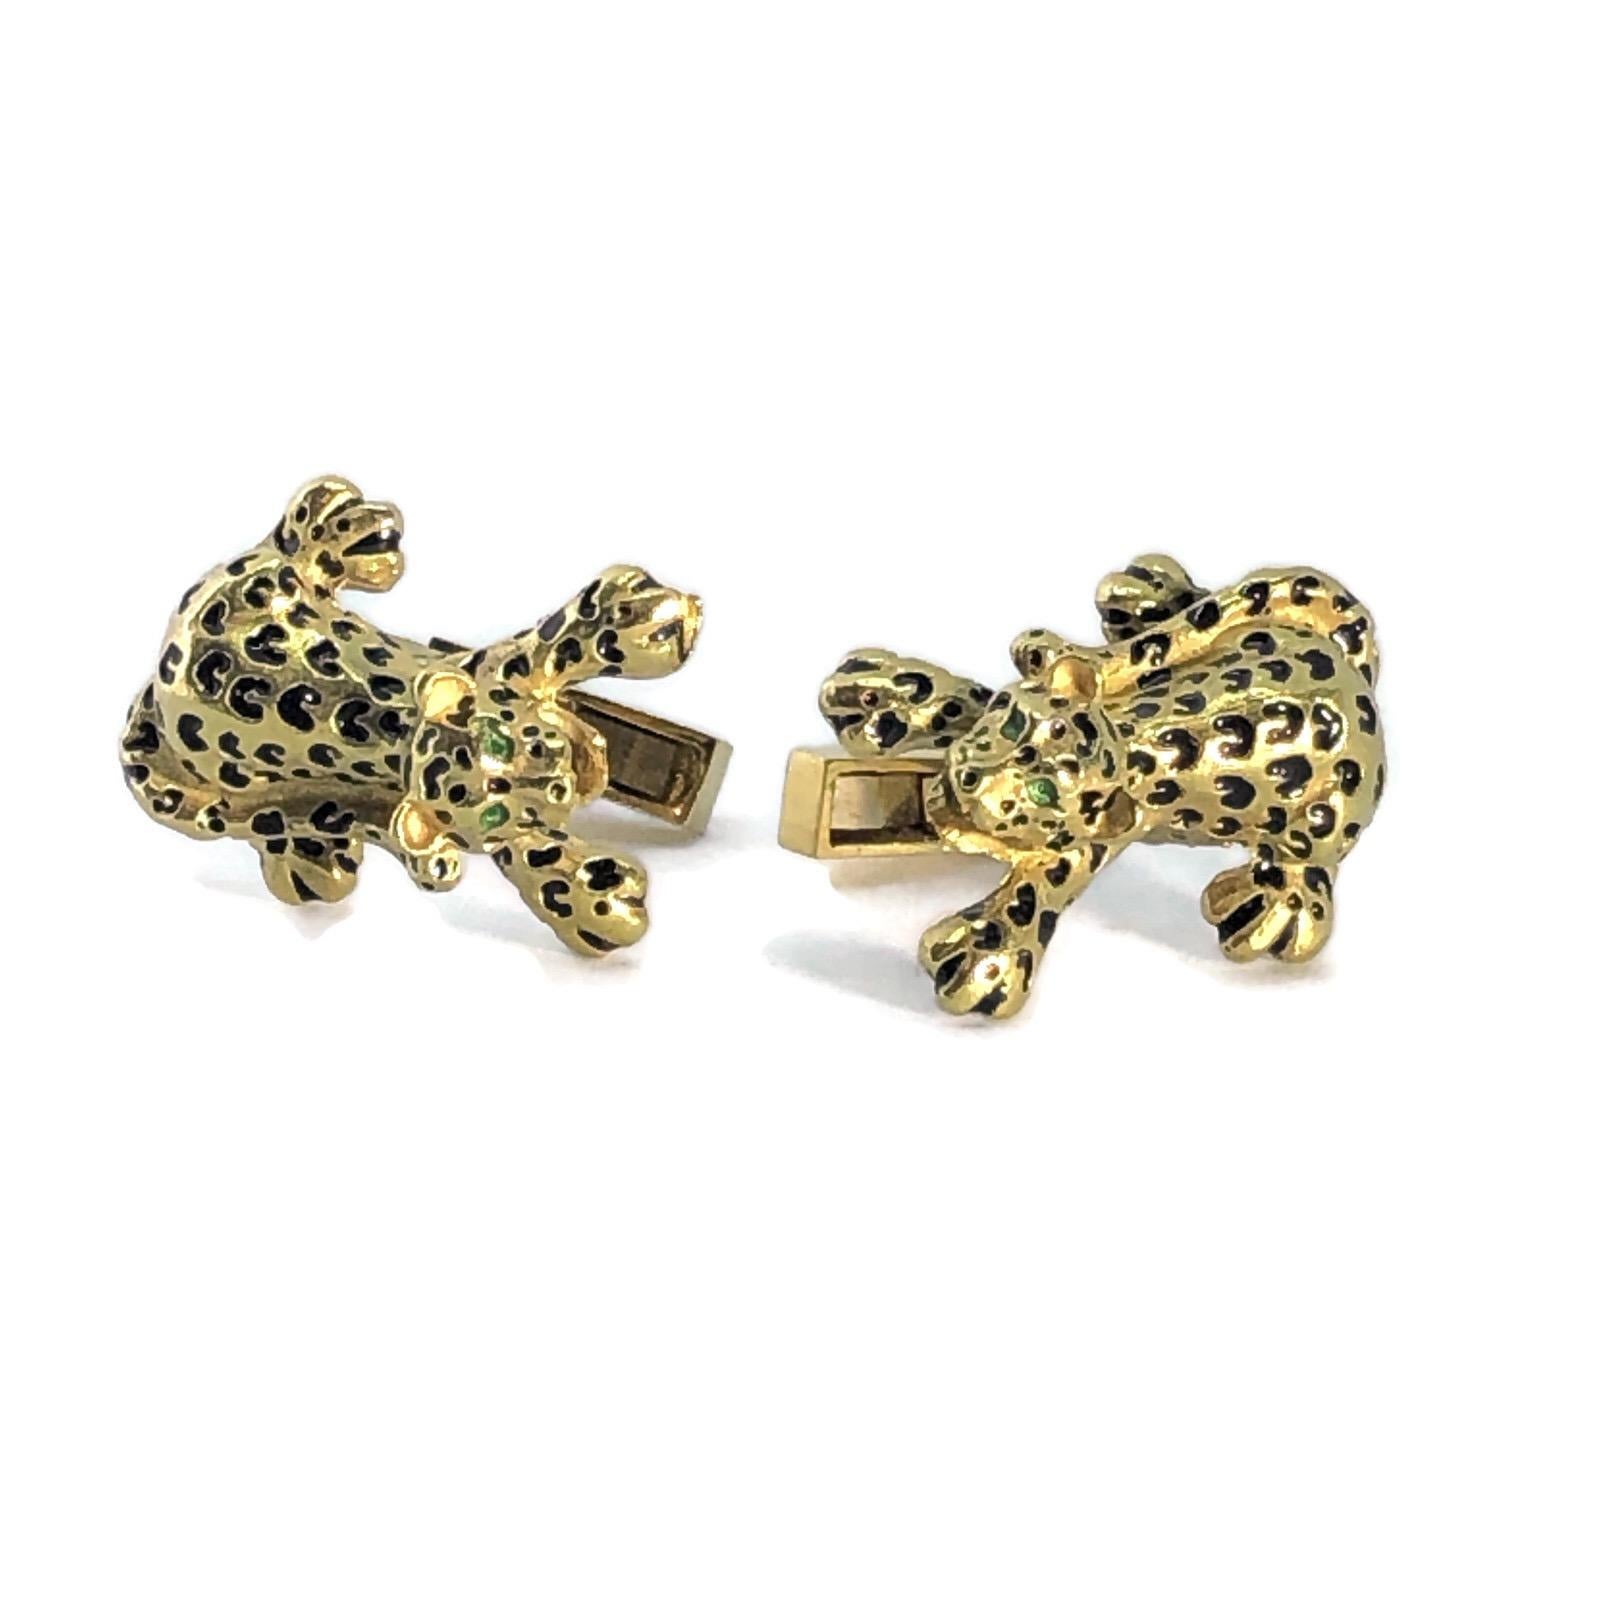 Unique collectible Vintage 18k yellow gold men's or ladies' cufflinks in mint condition although they are probably from the 1950's or 60's.  They are naturalistic and would make a wonderful addition to any owner of important jewelry. 

Add to your